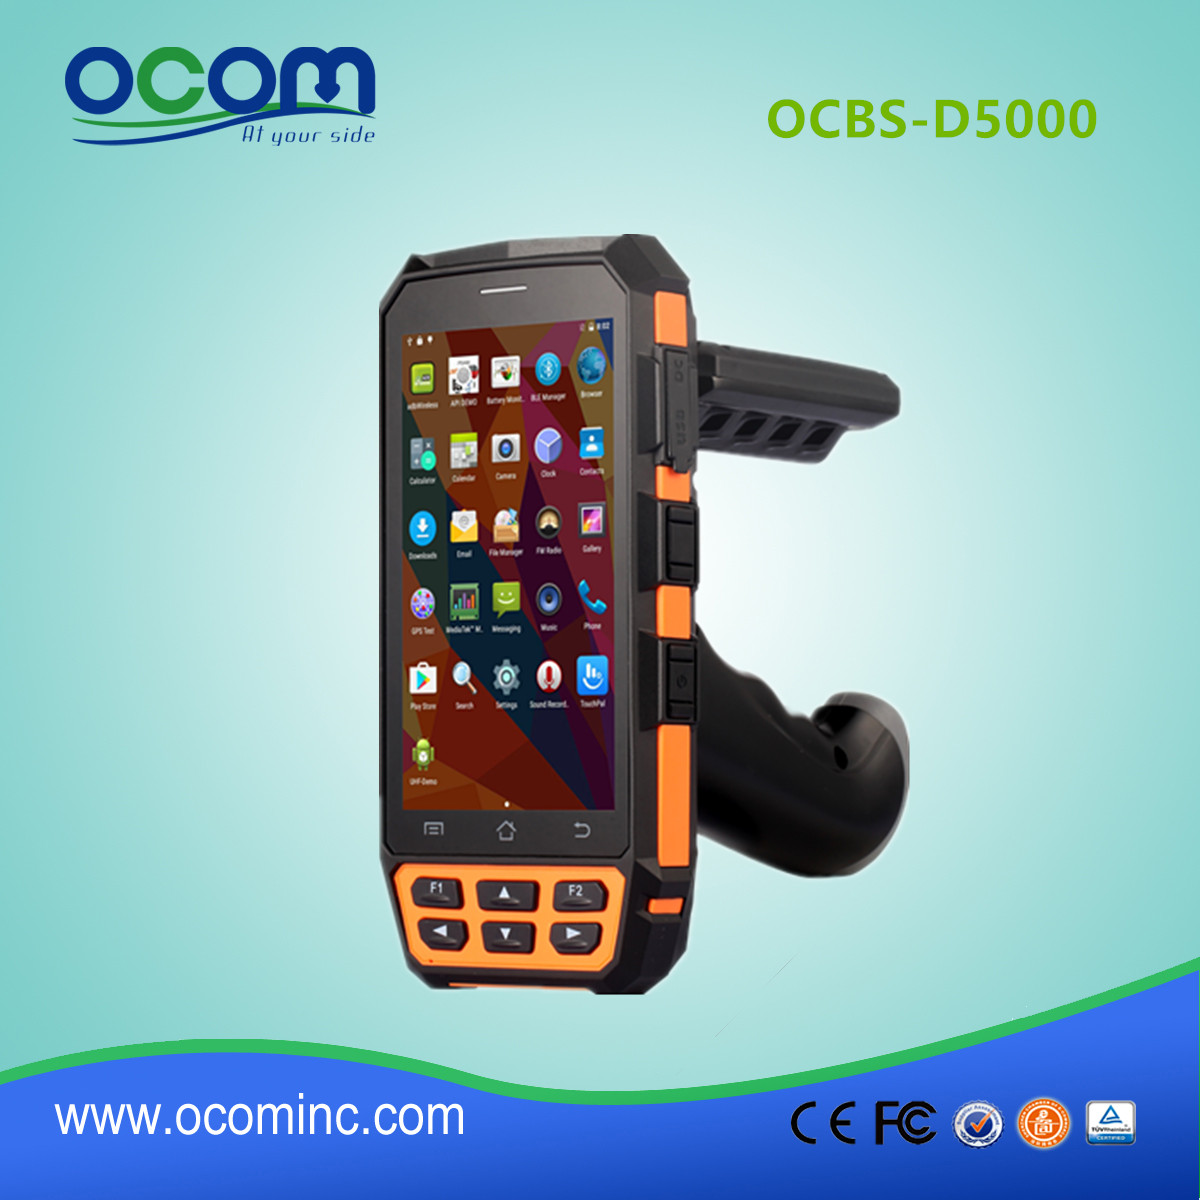 OCBS-D5000 courier qr code scanner android  pda with pistol grip